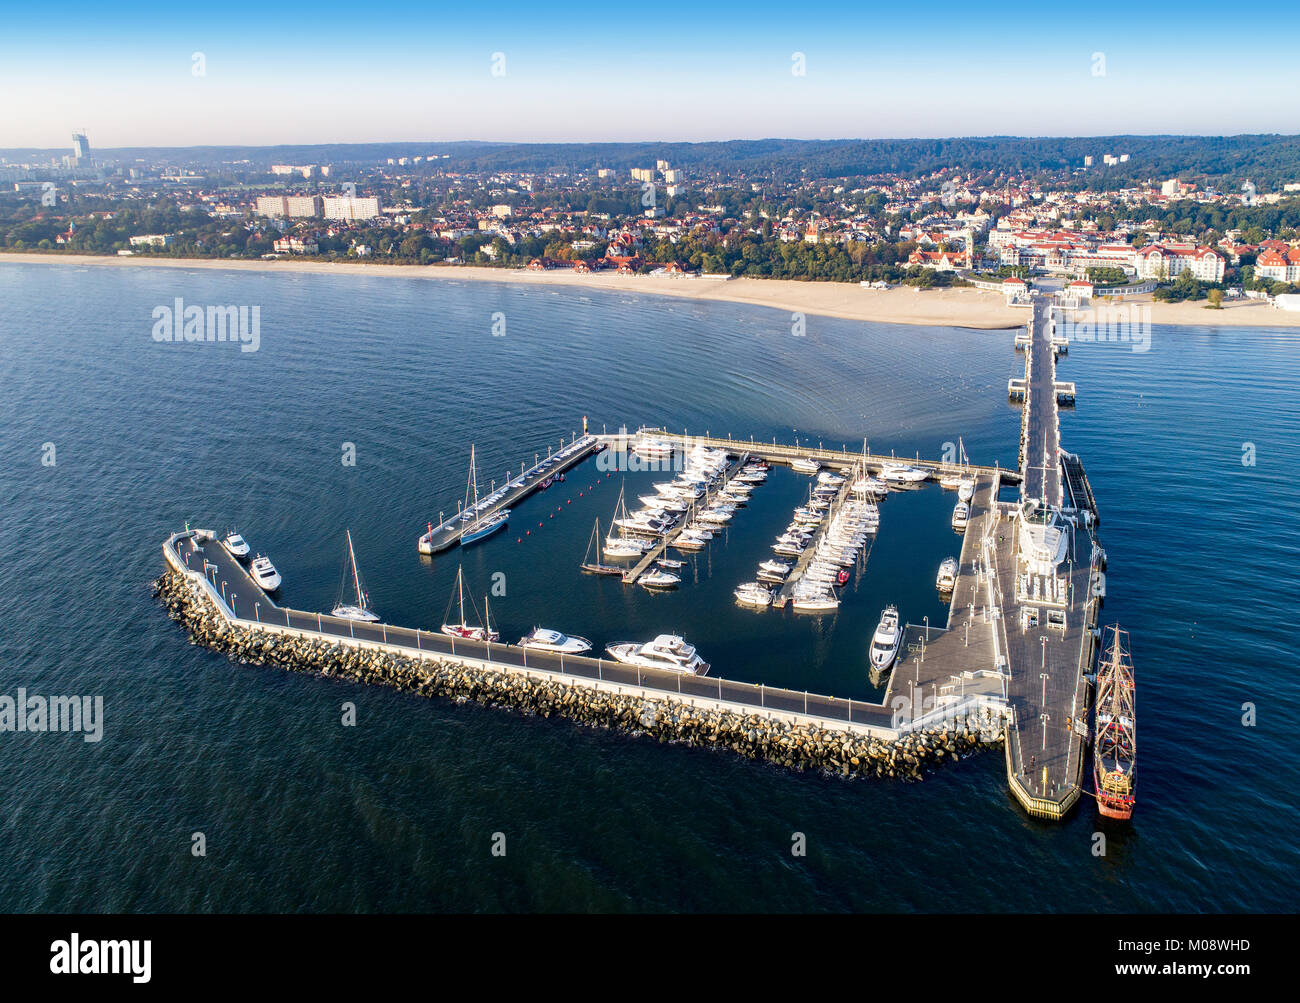 Sopot resort in Poland. Wooden pier (molo) with marina, yachts, pirate tourist ship, beach, hotels, park and promenade. Aerial view Stock Photo